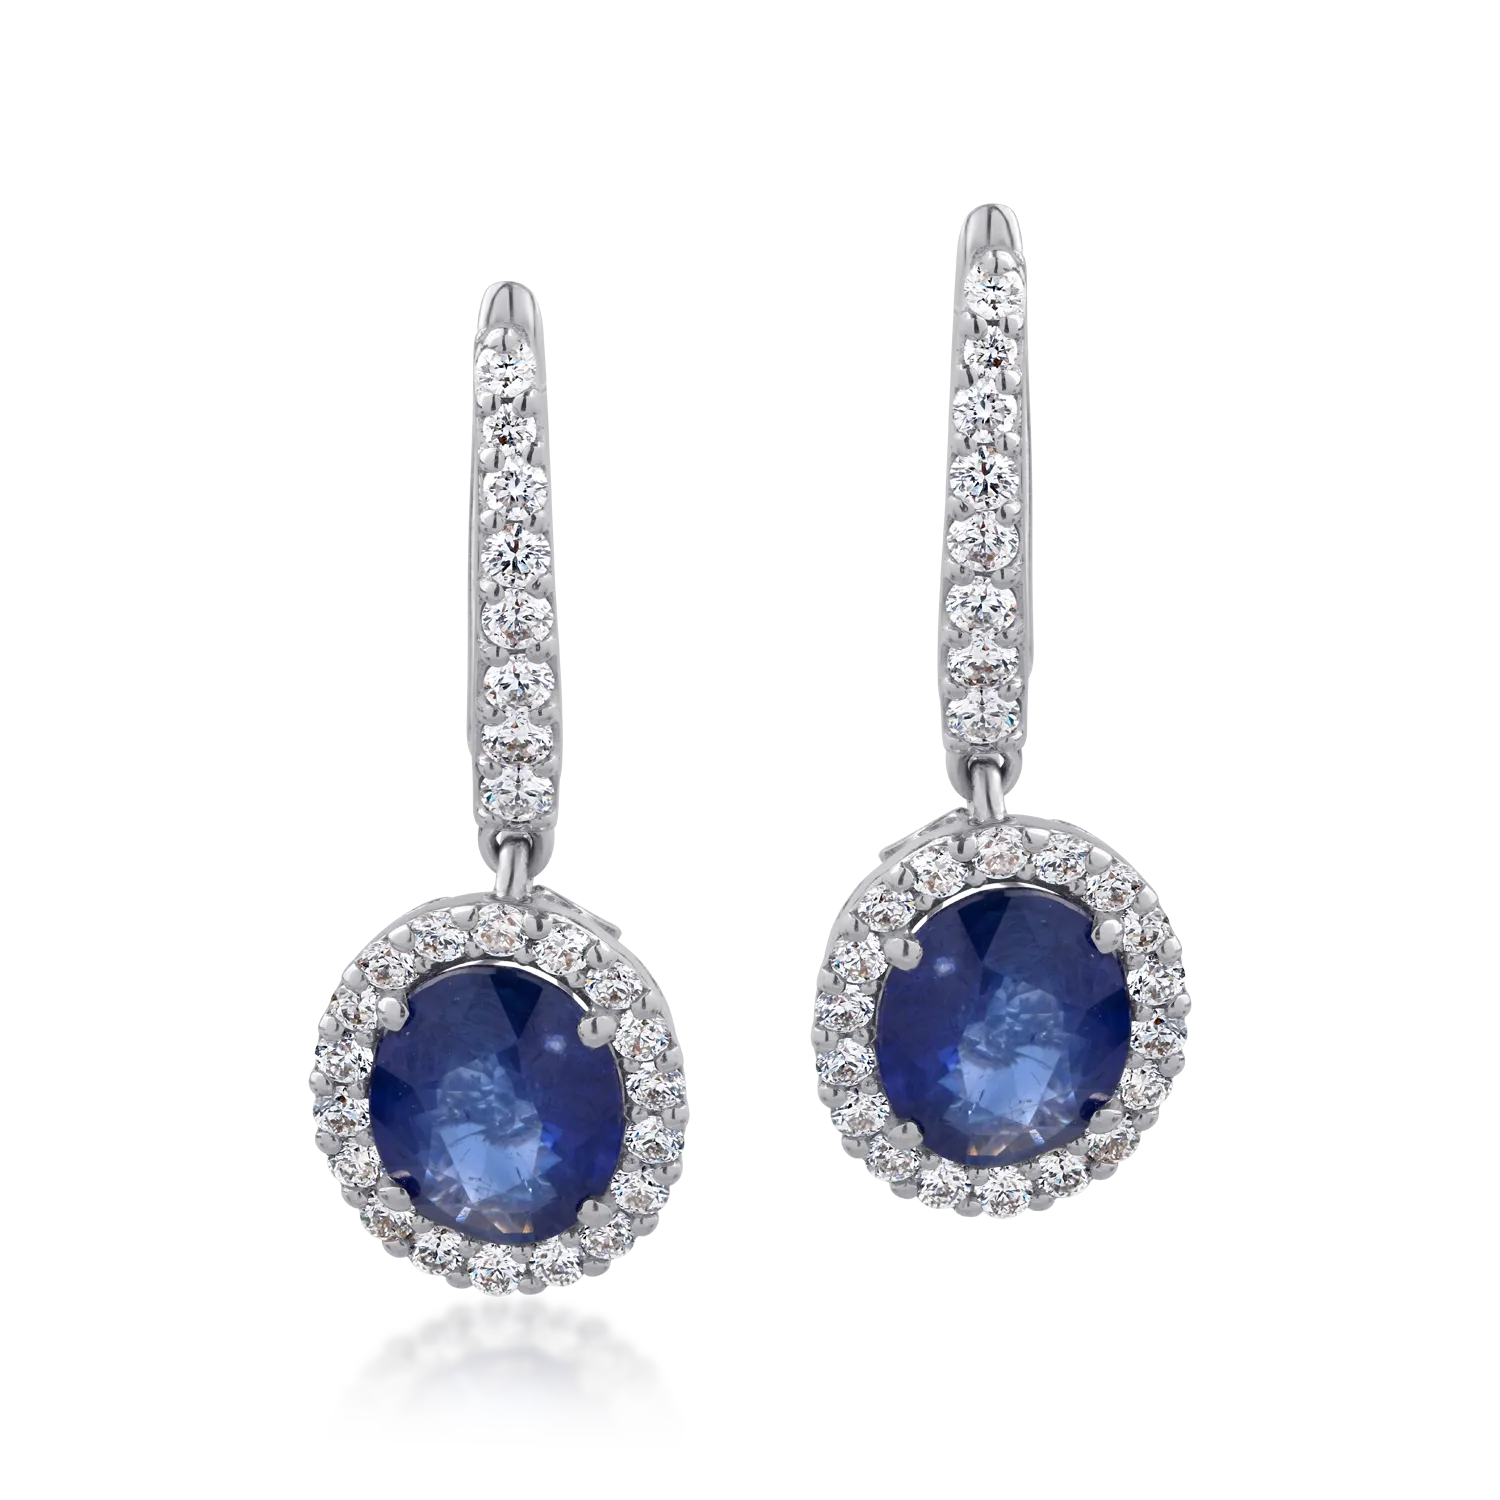 18K white gold earrings with 4.26ct precious stones